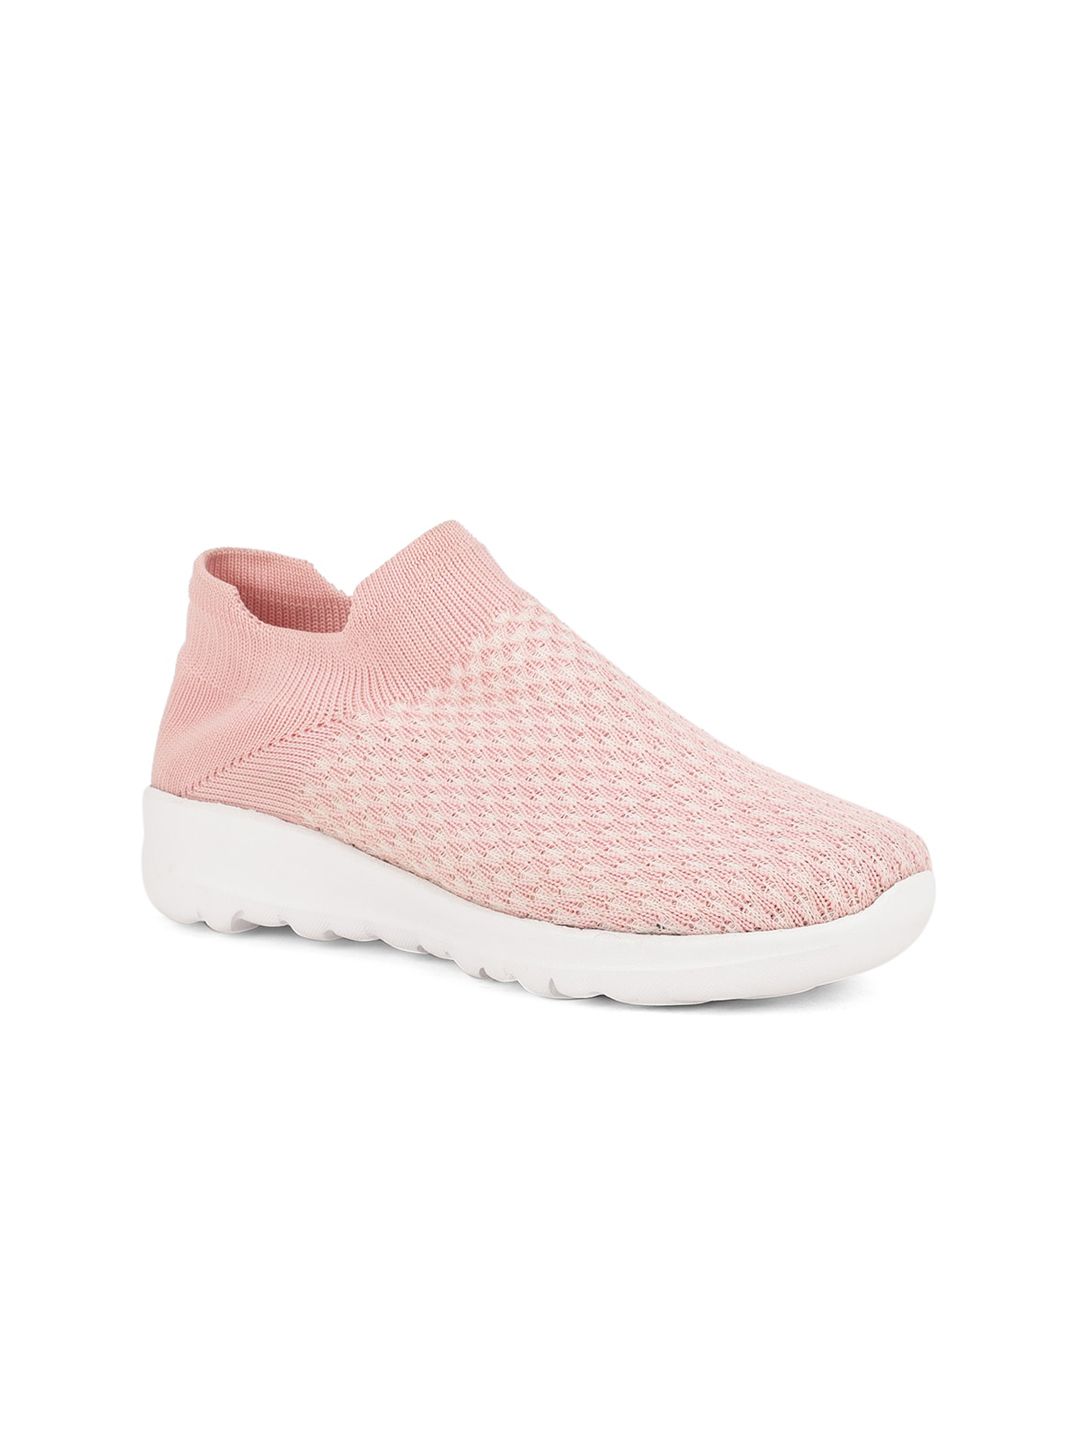 HERE&NOW Women Nude-Coloured & White Woven Design Slip-On Sneakers Price in India